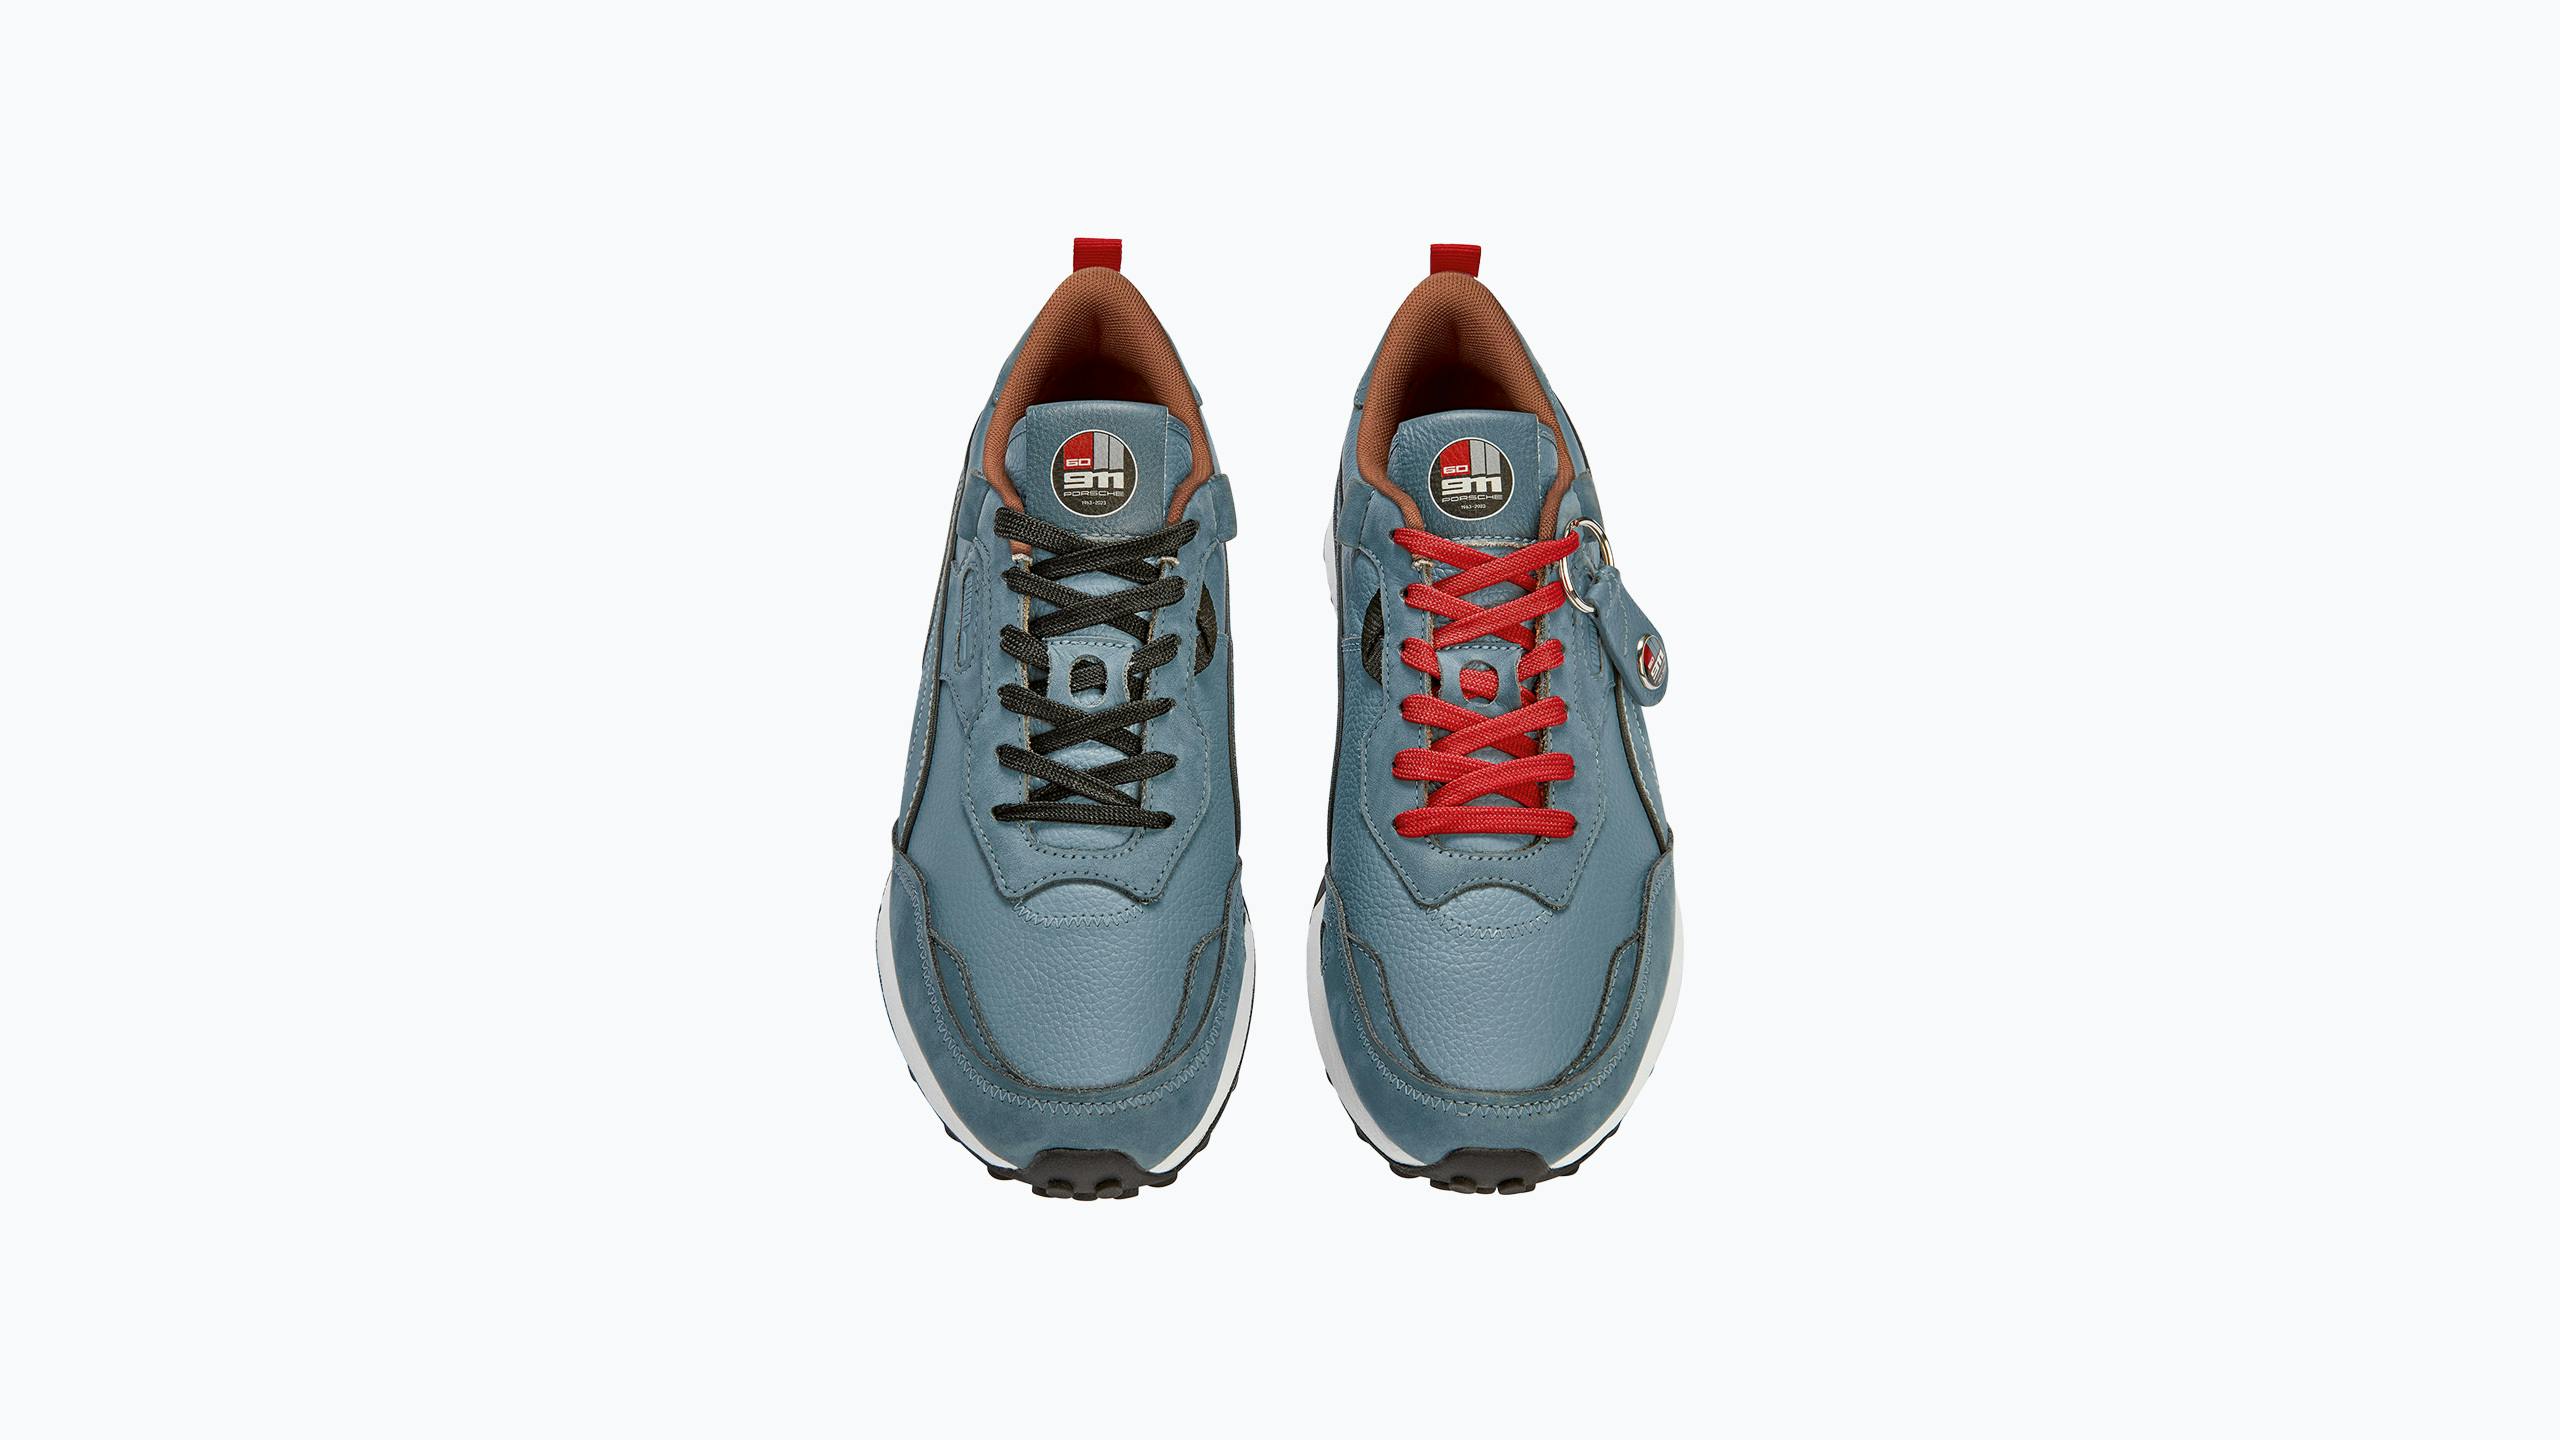 Pictured frontally is the blue Heritage sneaker from Porsche in cooperation with Puma. The right shoe has red laces and the left sneaker has black laces.